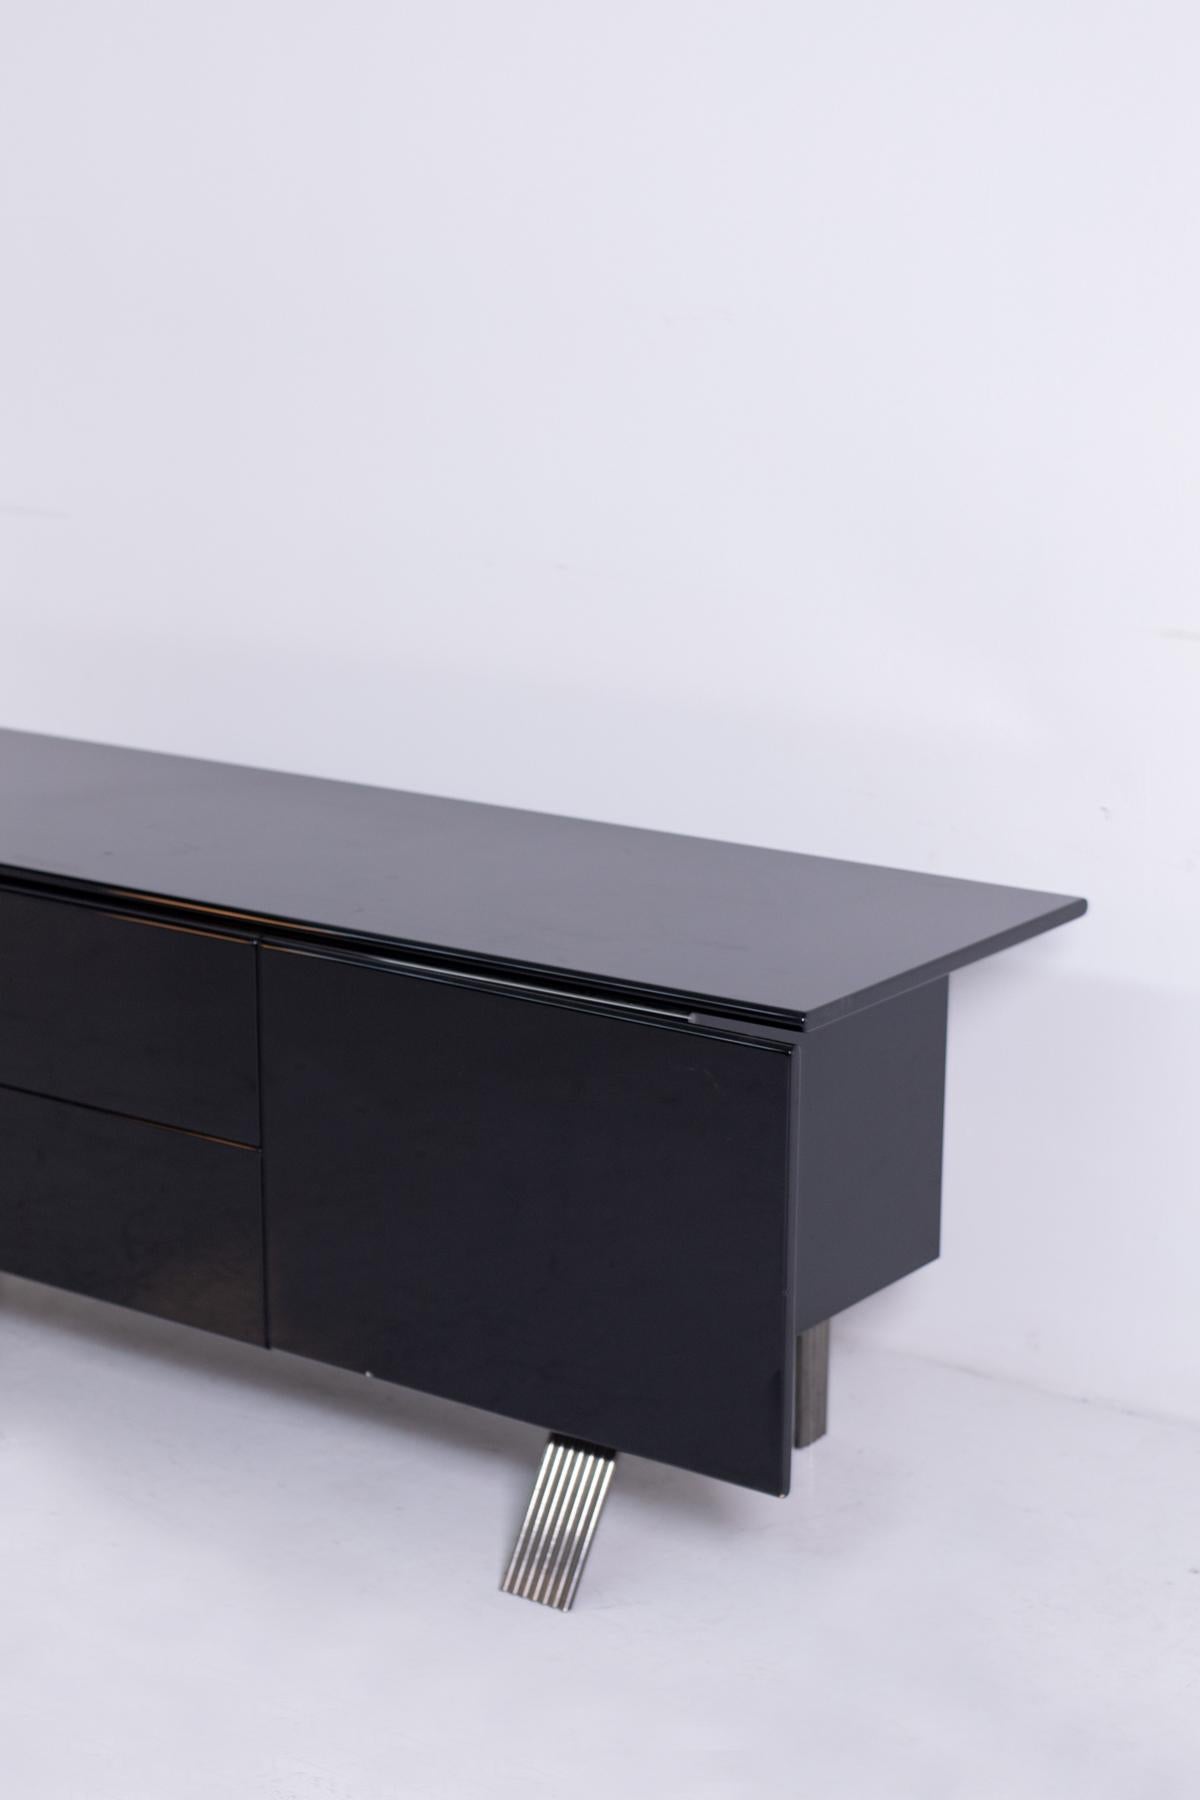 Late 20th Century Italian Sideboard in Black Lacquered Wood and Steel, 1970s